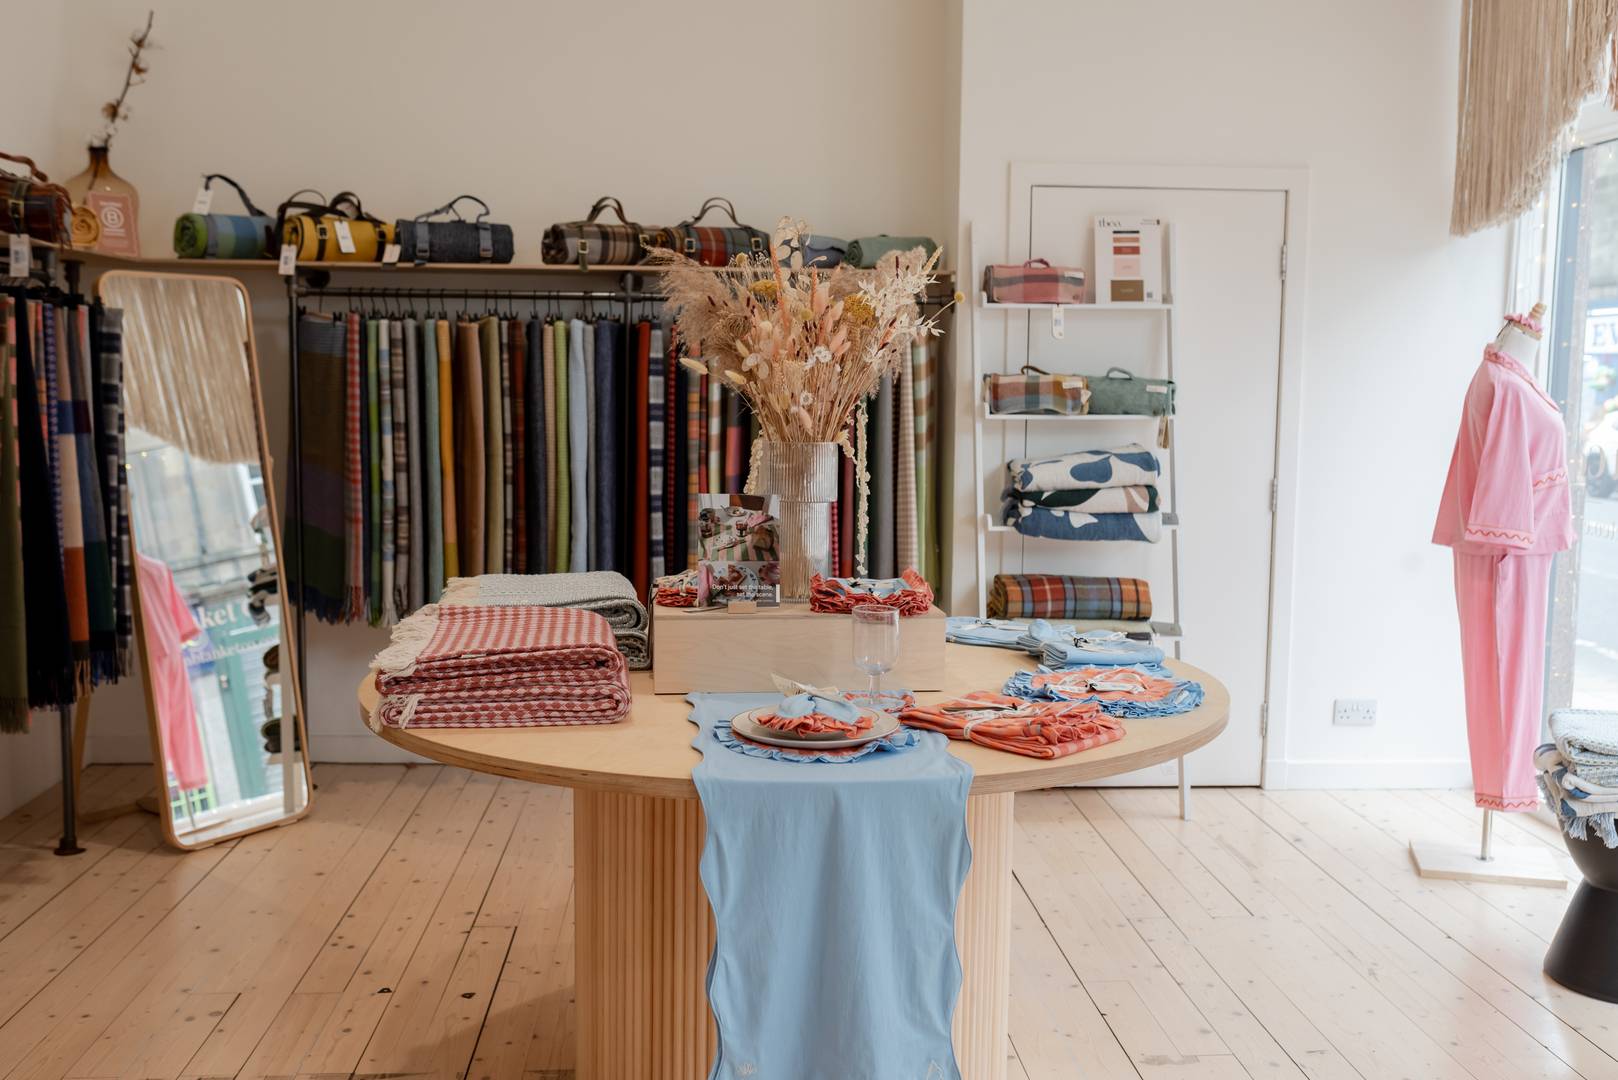 TBCo home wear section, featuring a variation of blankets alongside tableware set up on a circular wooden table.